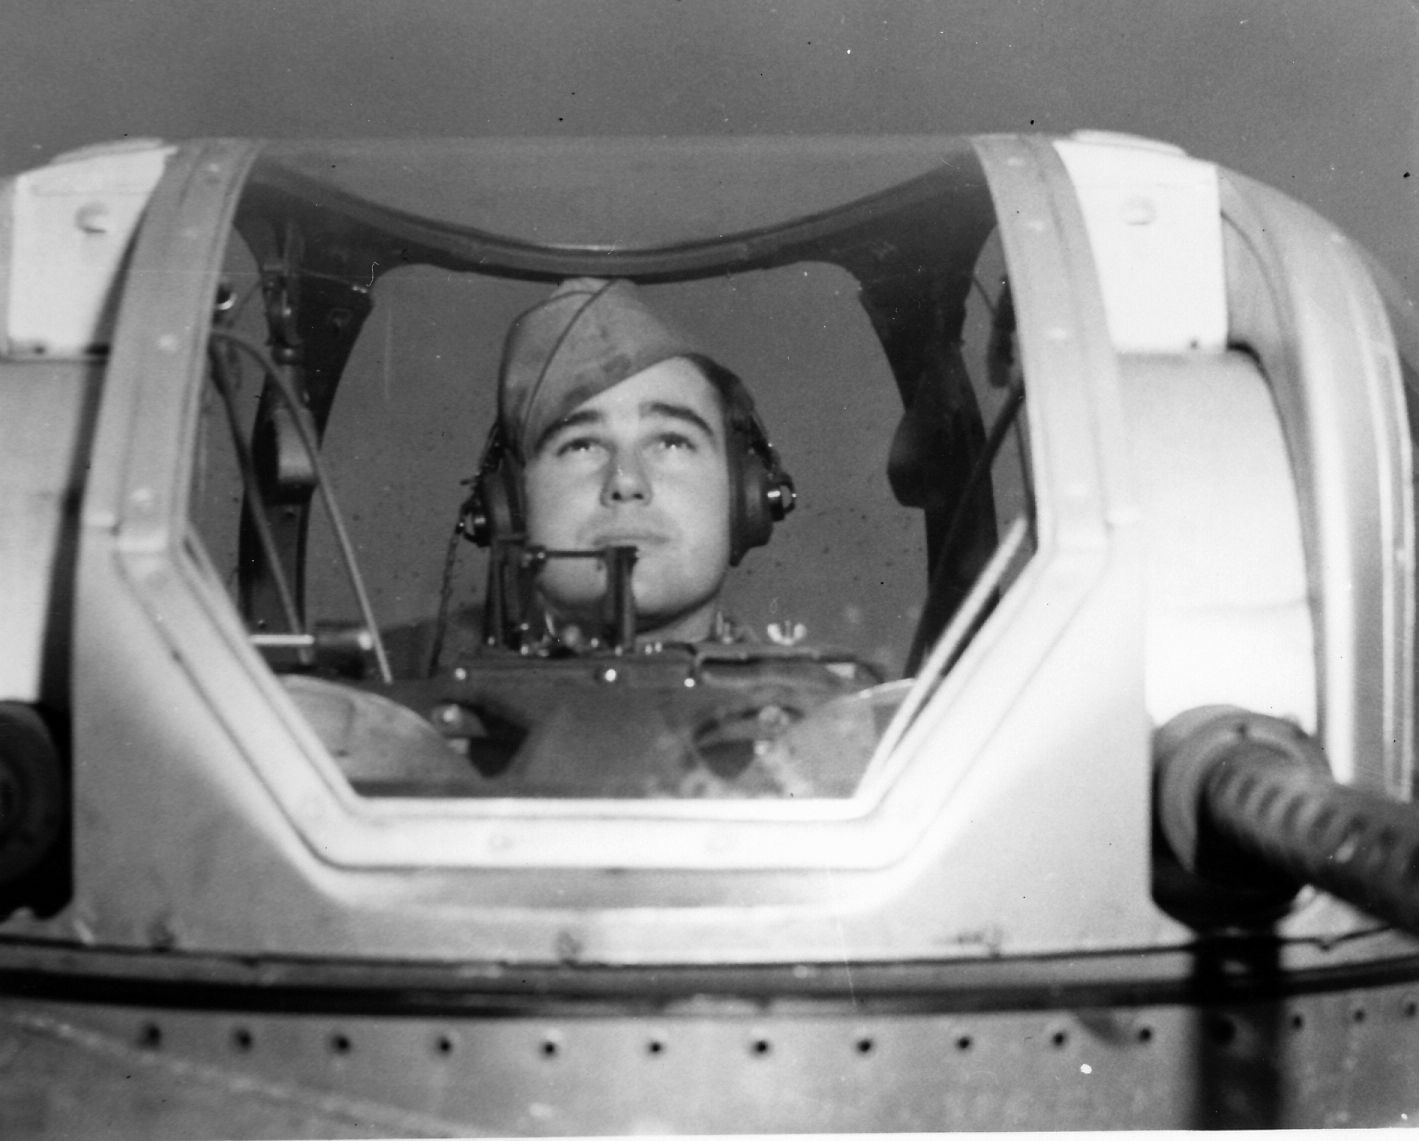 Looking over the barrels of his twin .50-caliber machine guns, Sergeant Arnold Burton sits in the top turret of his B-17. Burton was a participant in several of the early U.S. daylight raids over Nazi-occupied Europe and considered the submarine pens at St. Nazaire his toughest target.